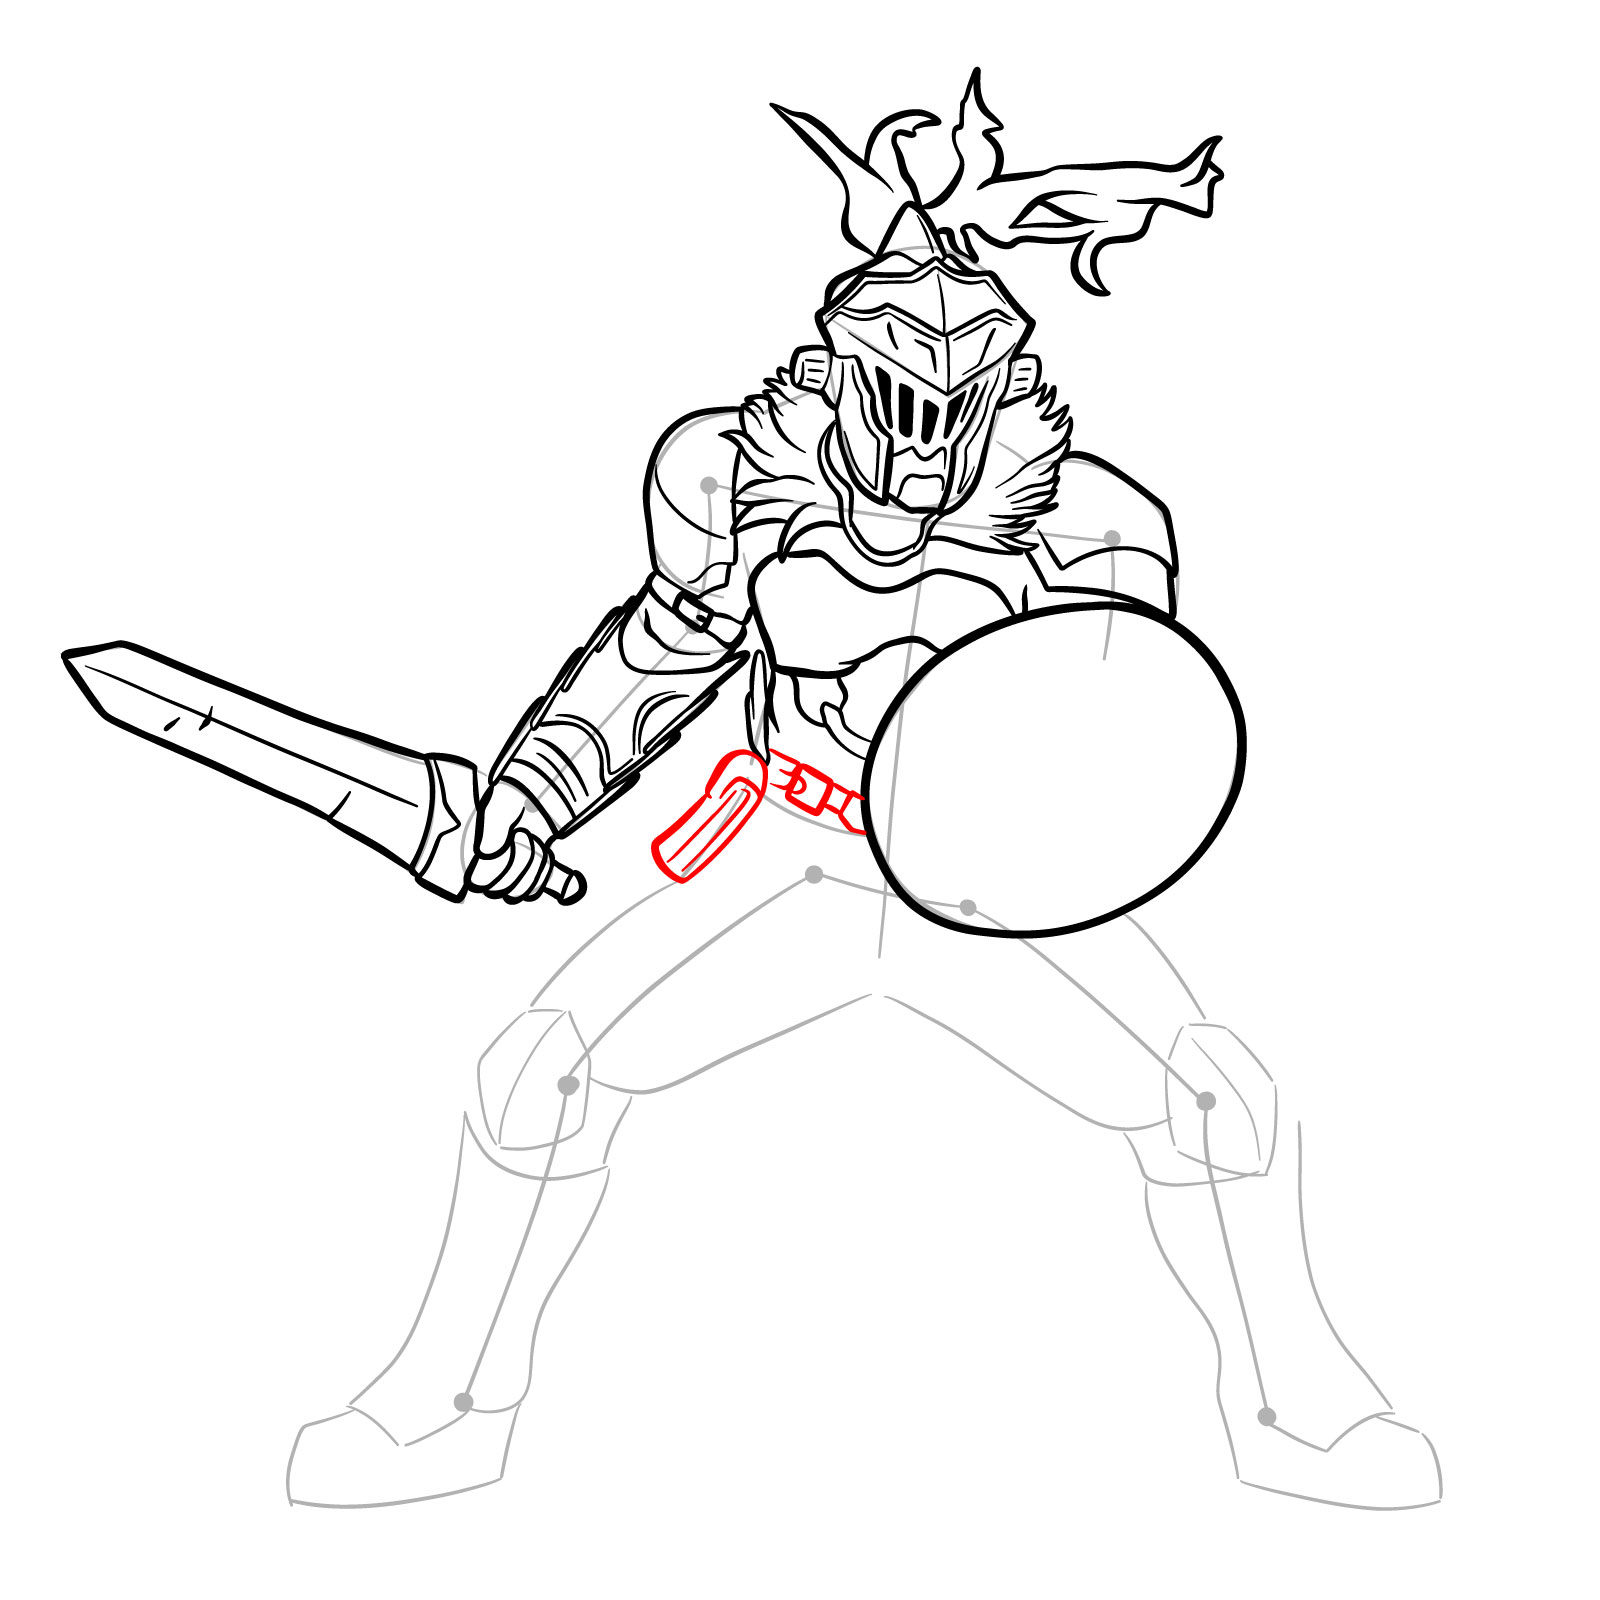 How to Draw Goblin Slayer in battle stance - step 25